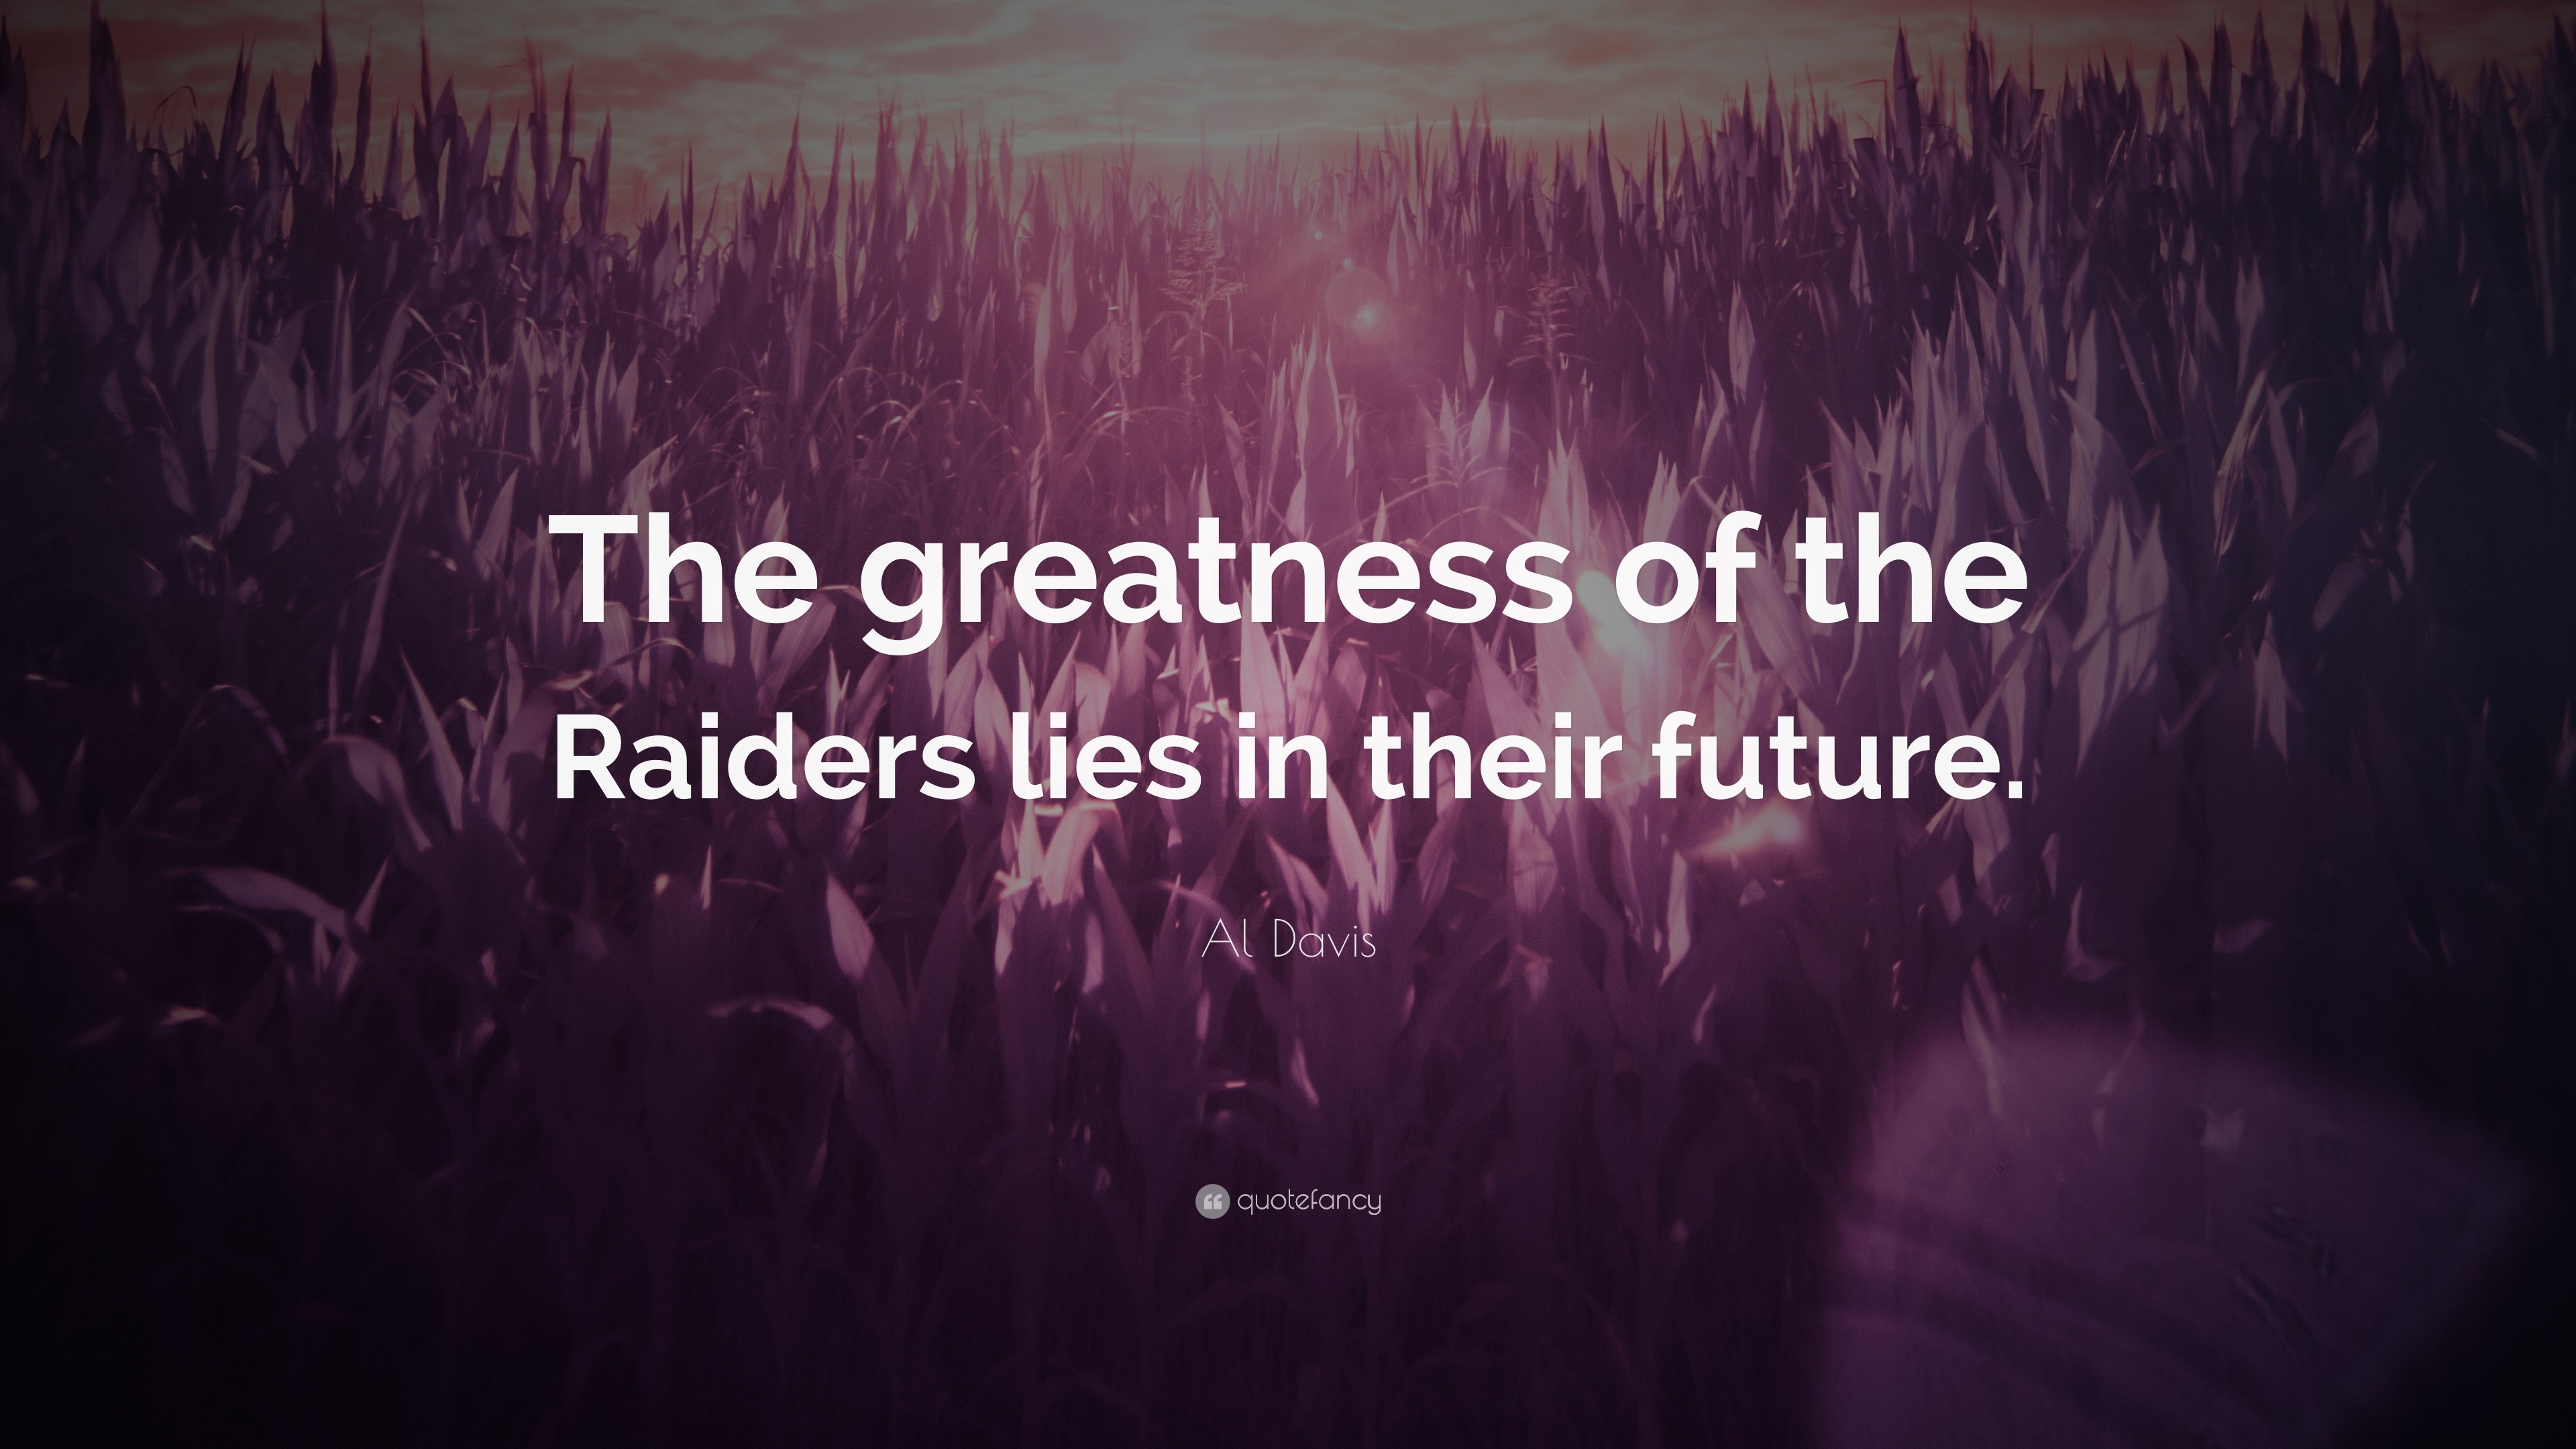 Al Davis Quote: “The greatness of the Raiders lies in their future.”